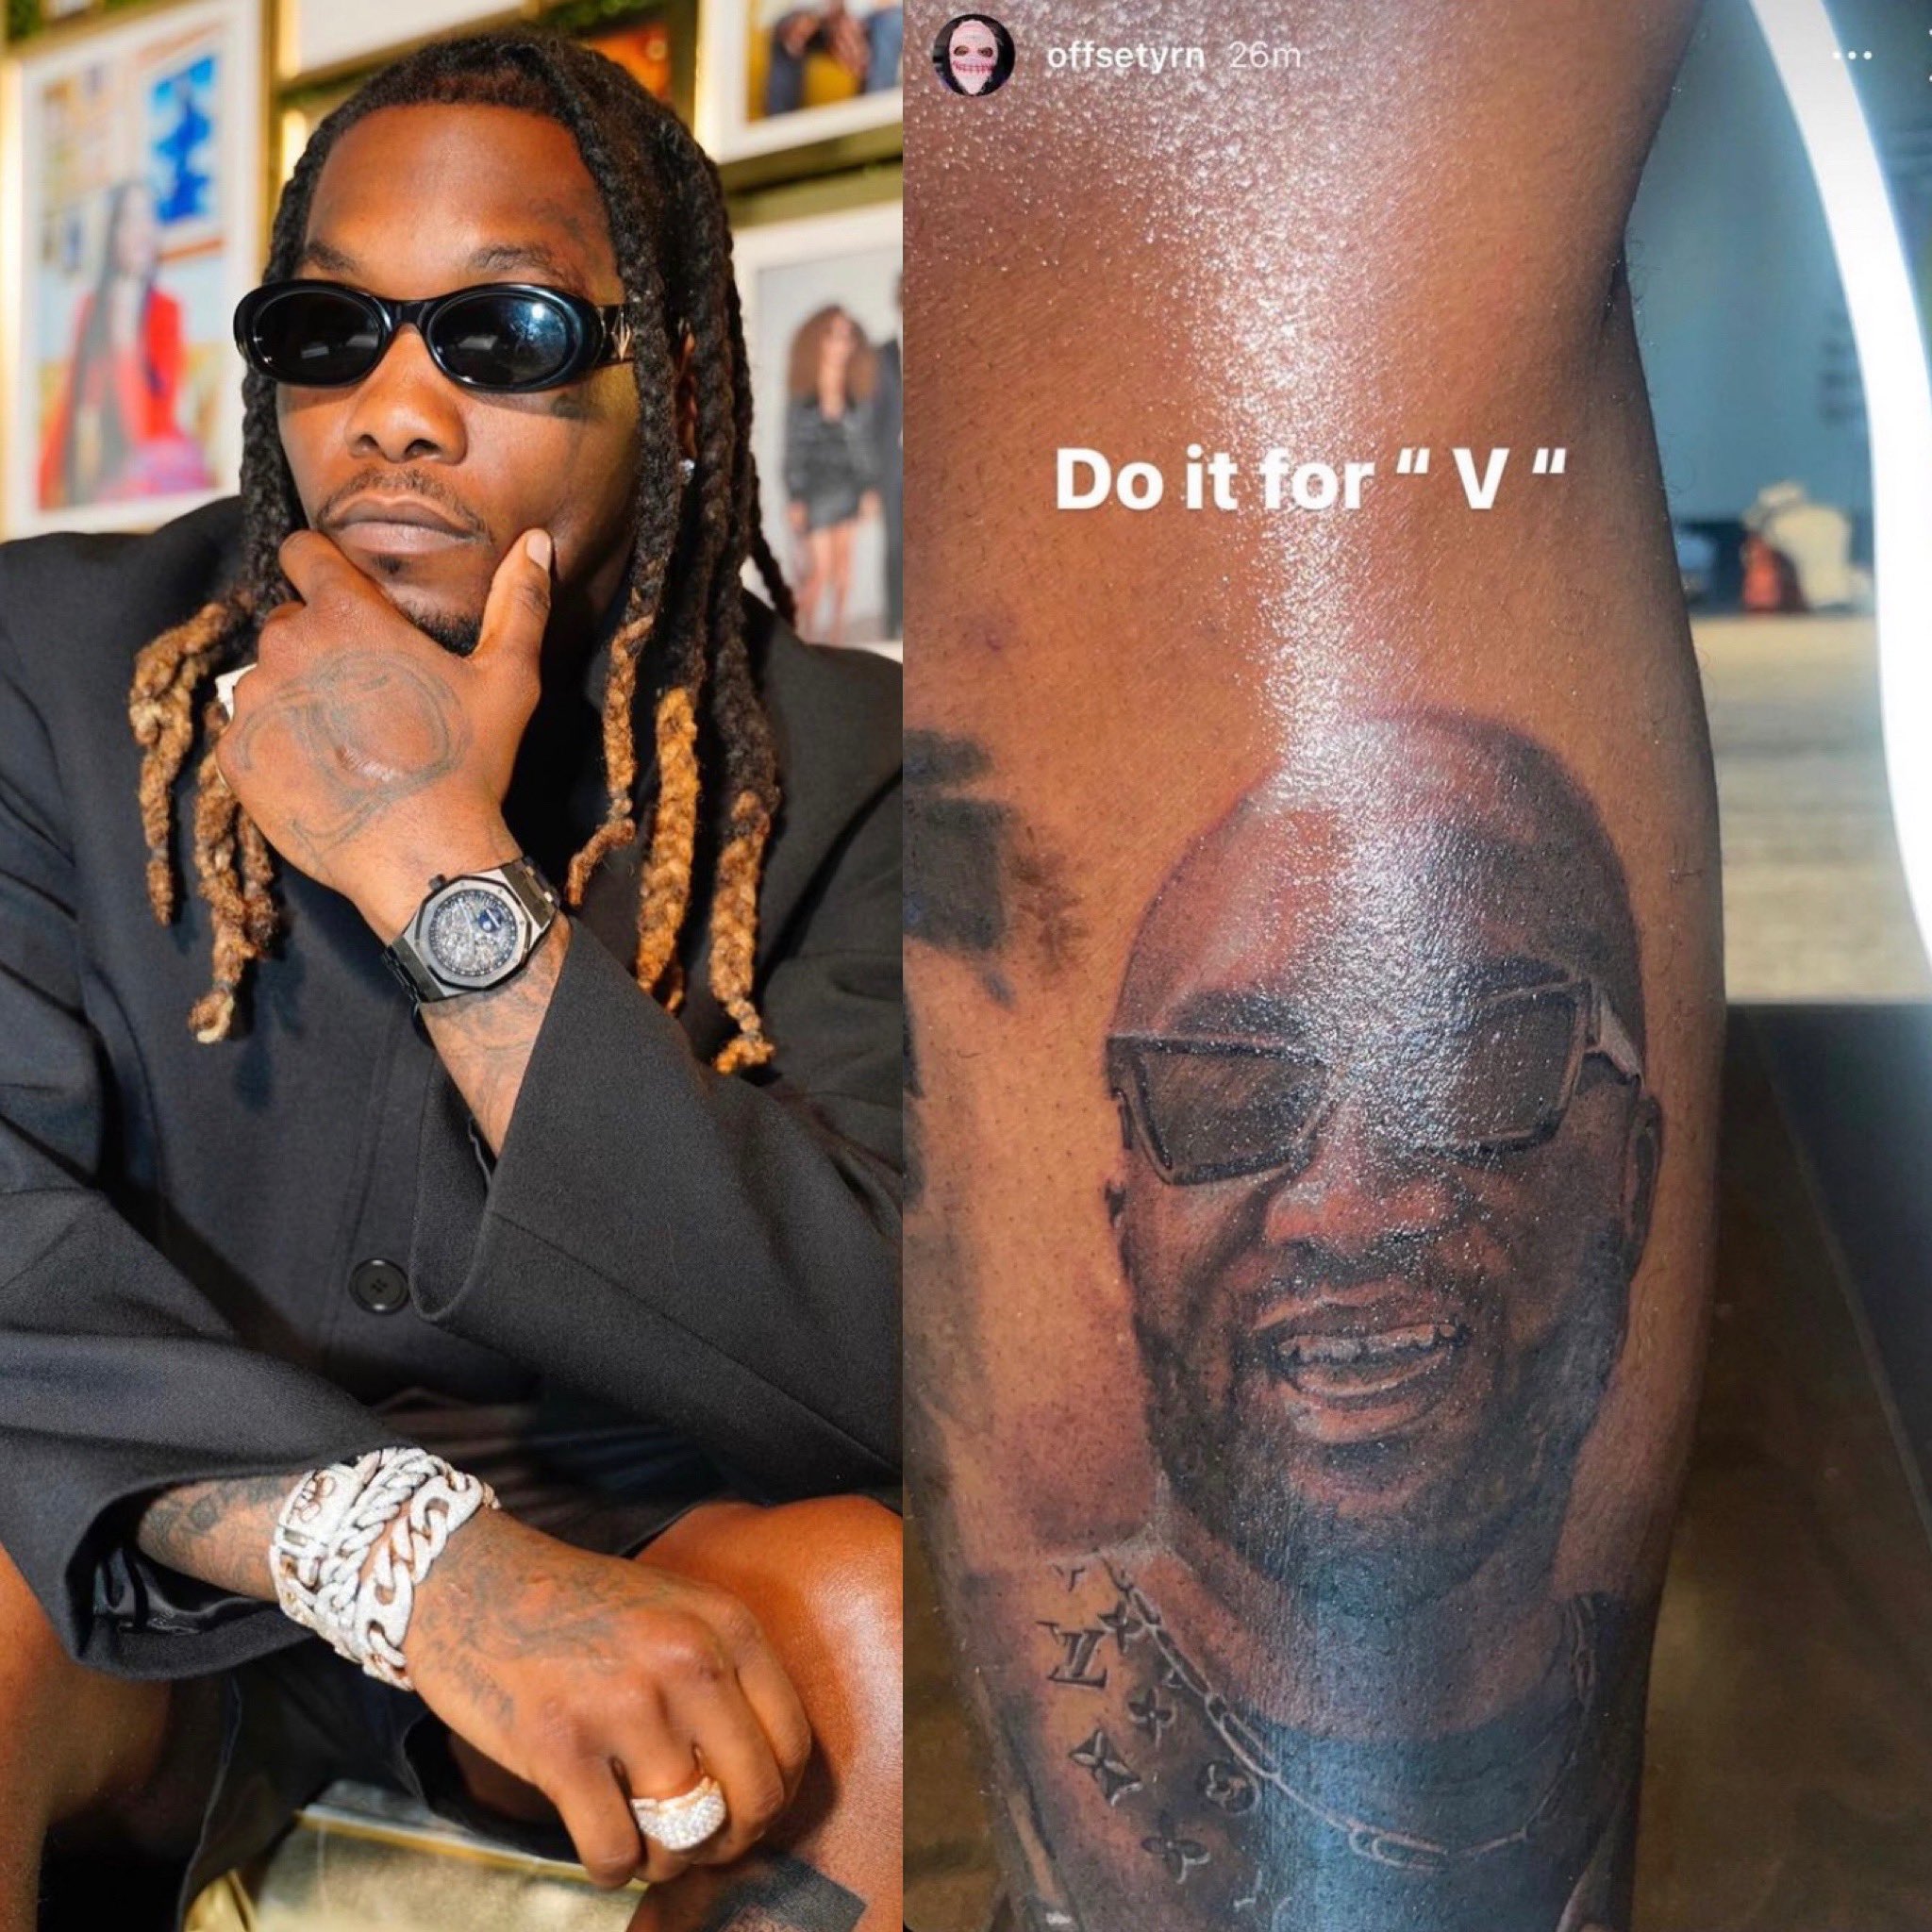 Daily Loud on X: Offset shows off new tattoo dedicated to Virgil Abloh  🔥🙏  / X